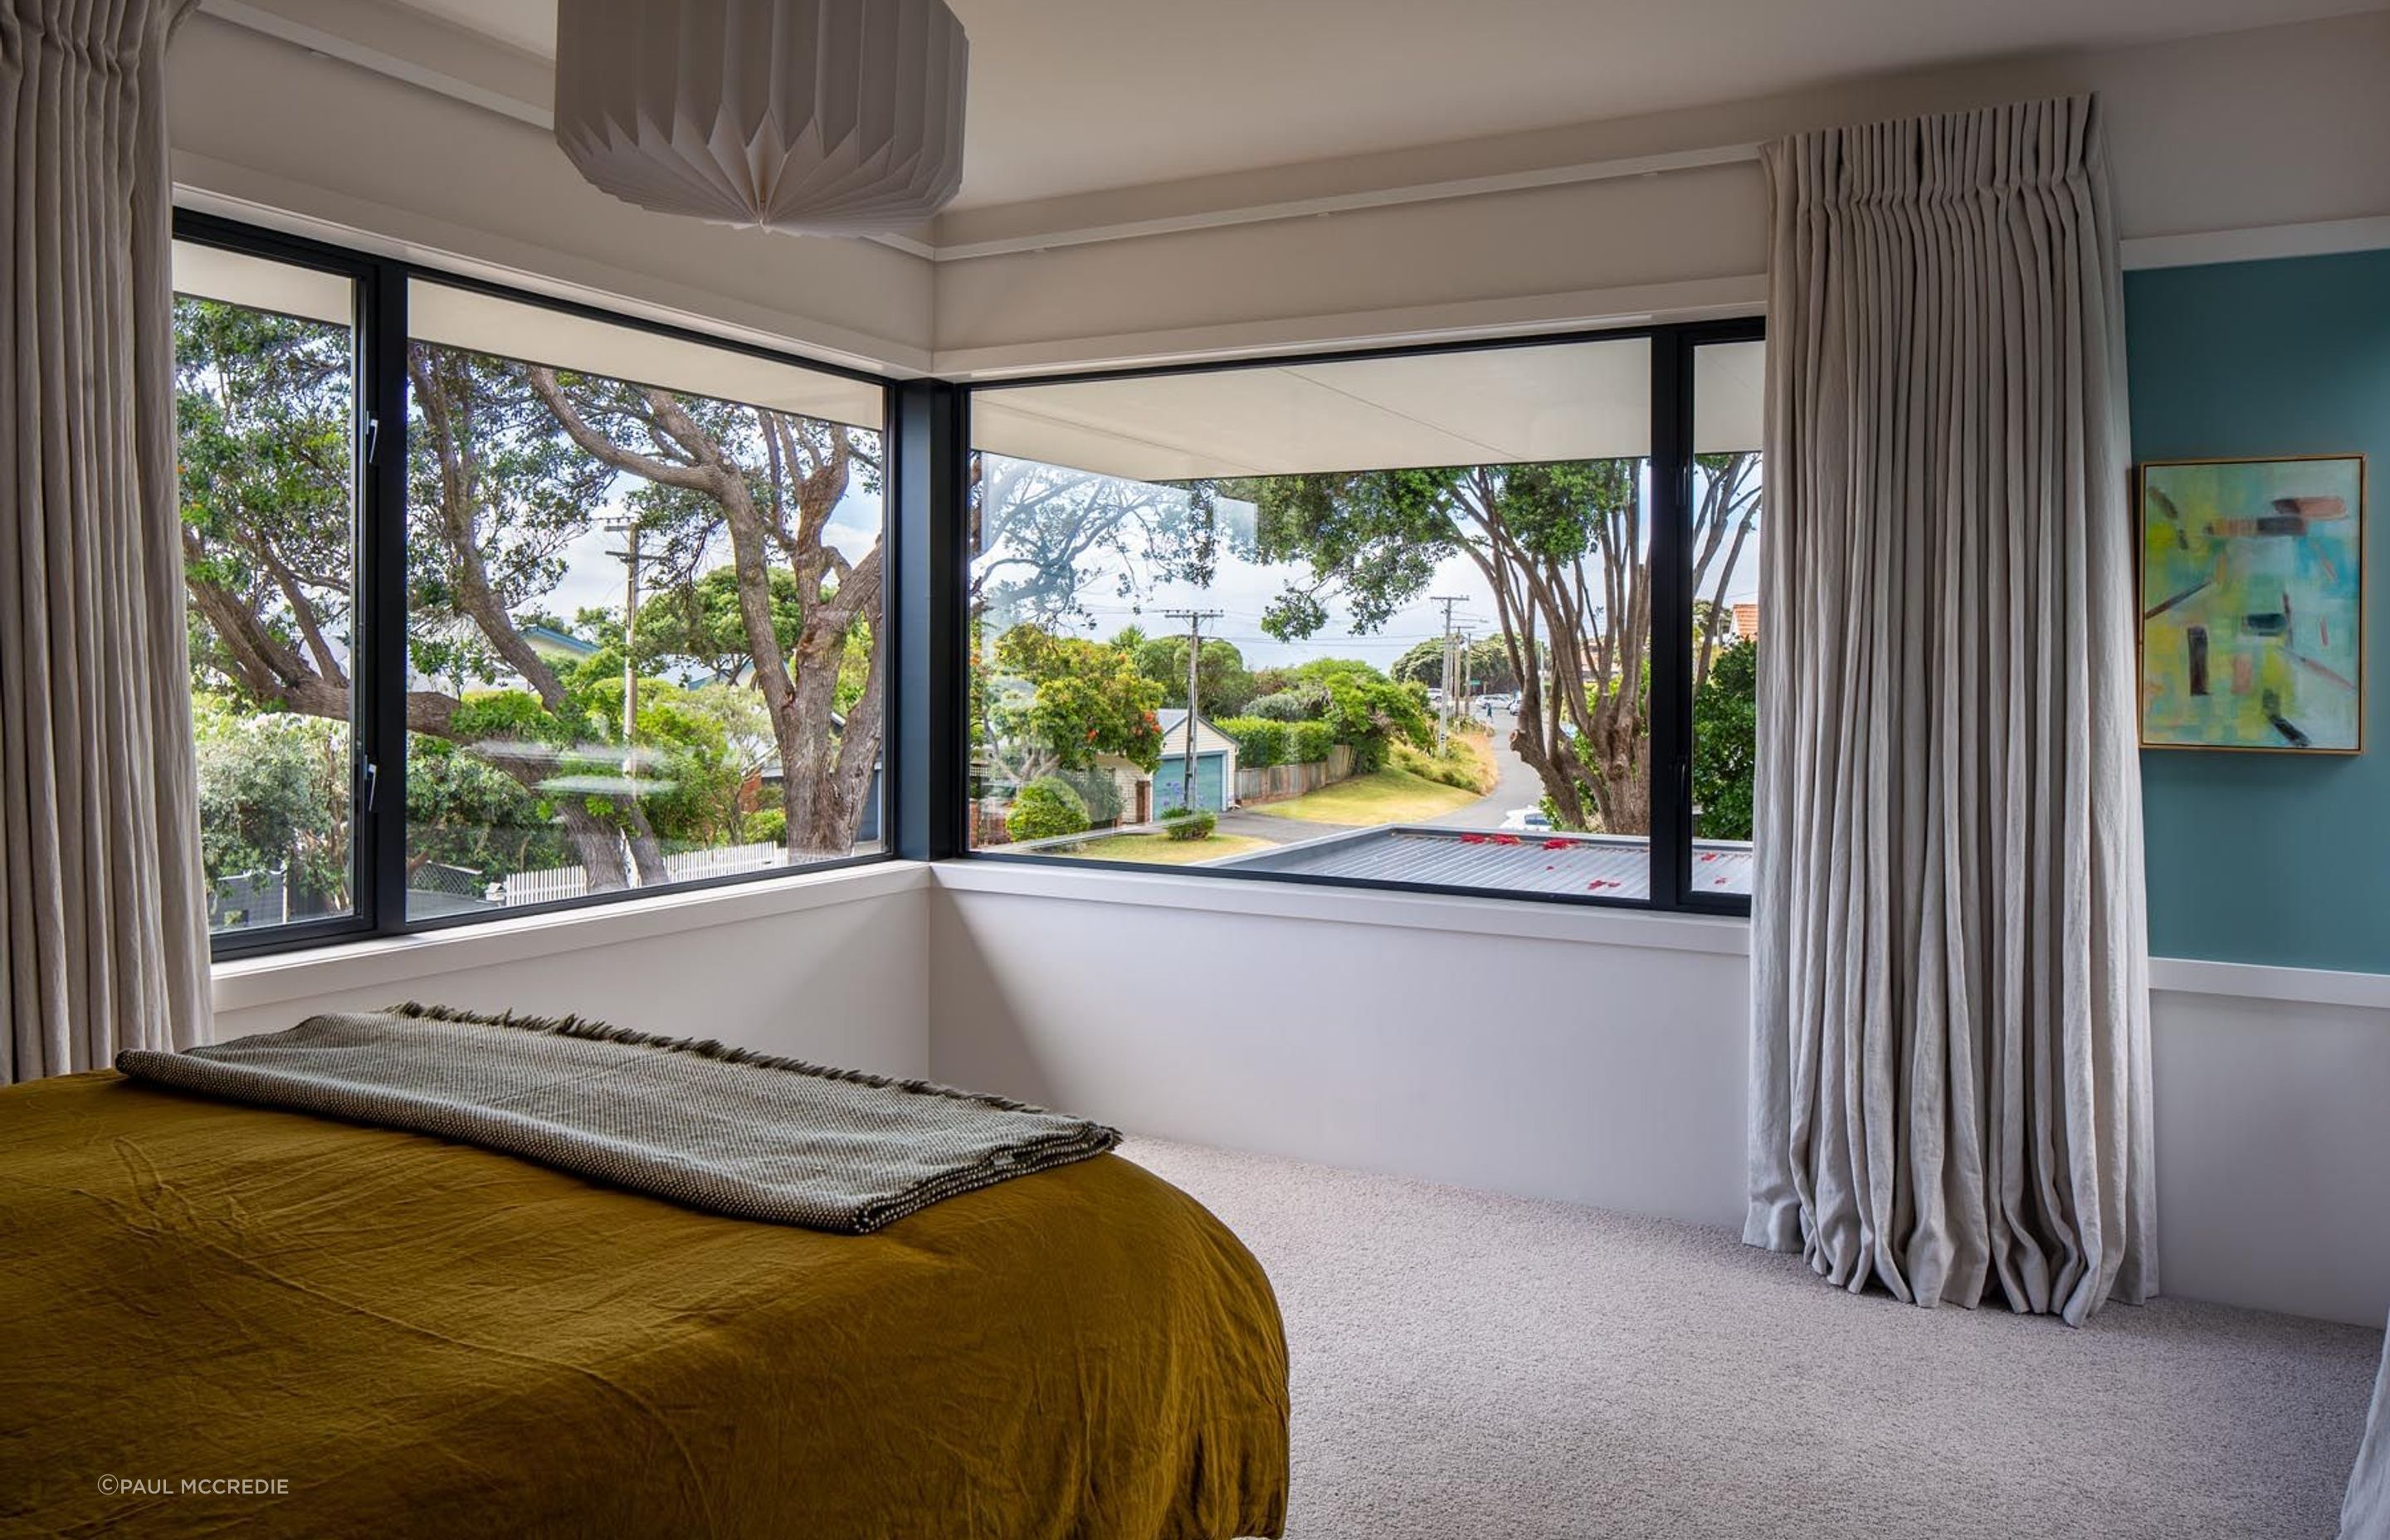 An existing pōhutukawa tree is on the corner of the property. “The master bedroom looks through the pōhutukawa tree out to the street, which is quite pretty.”